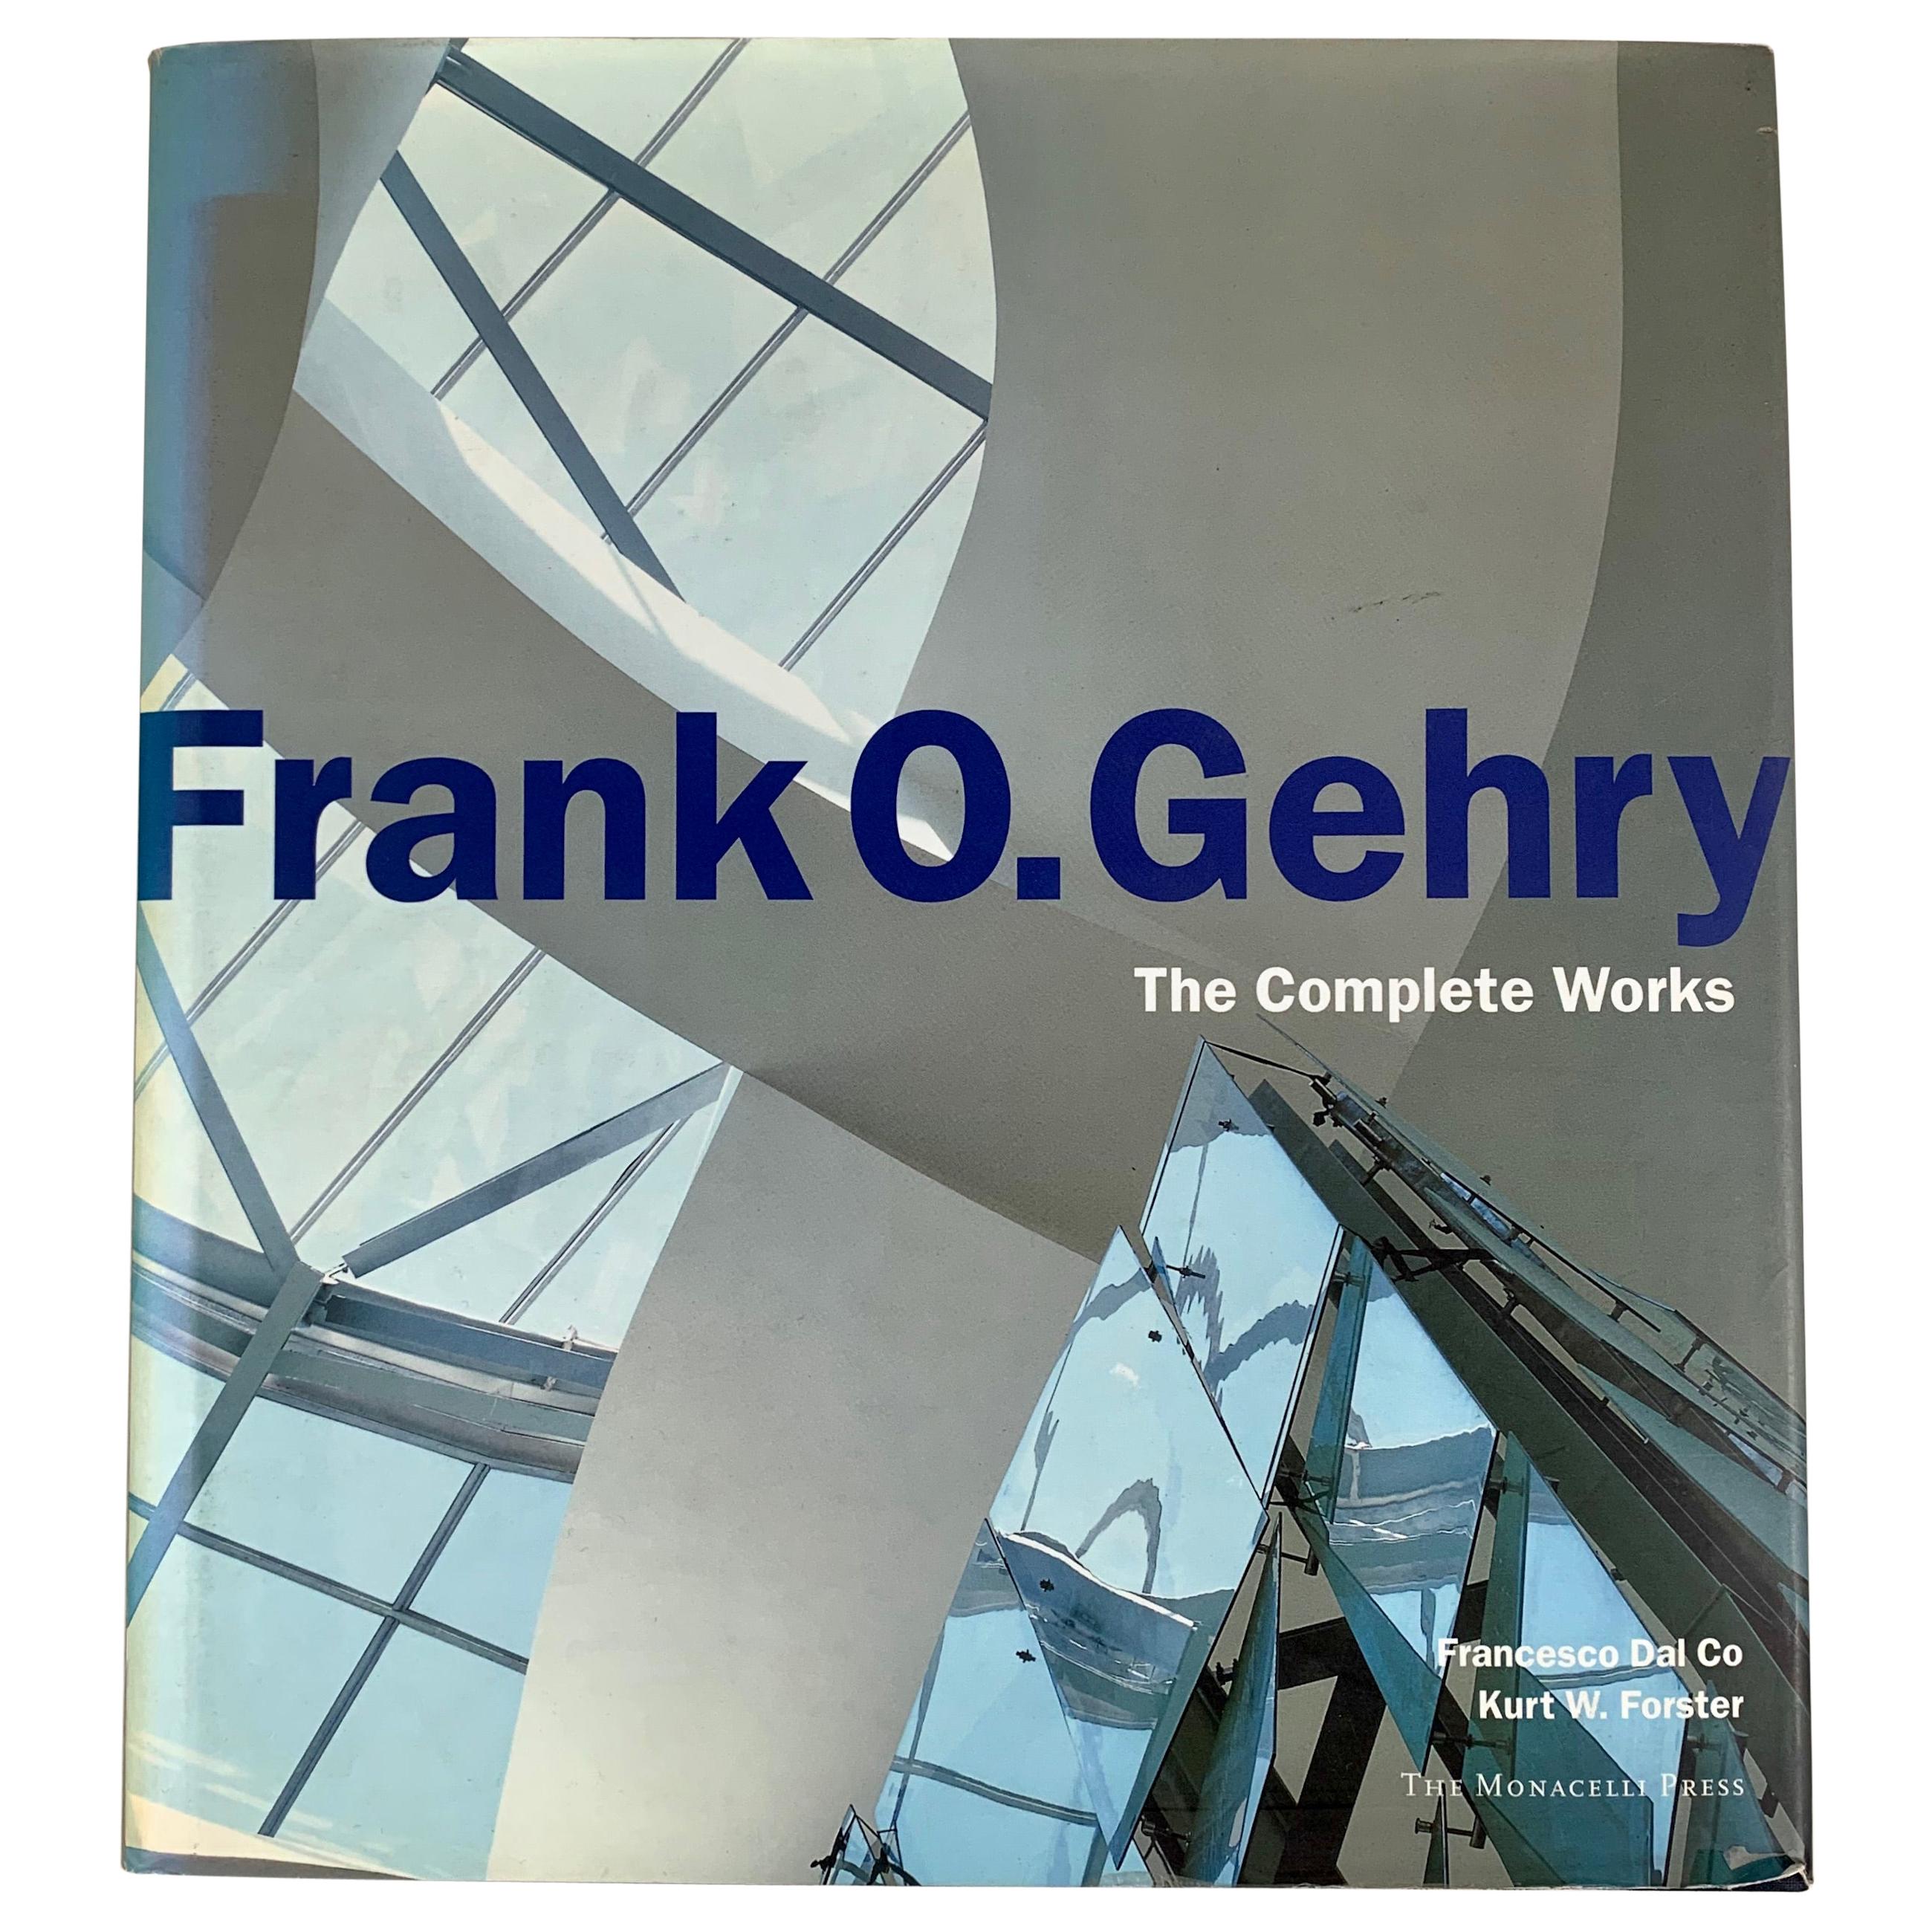 Frank O Gehry, The Complete Works by Francesco Dal Co. Modern Architecture Book For Sale